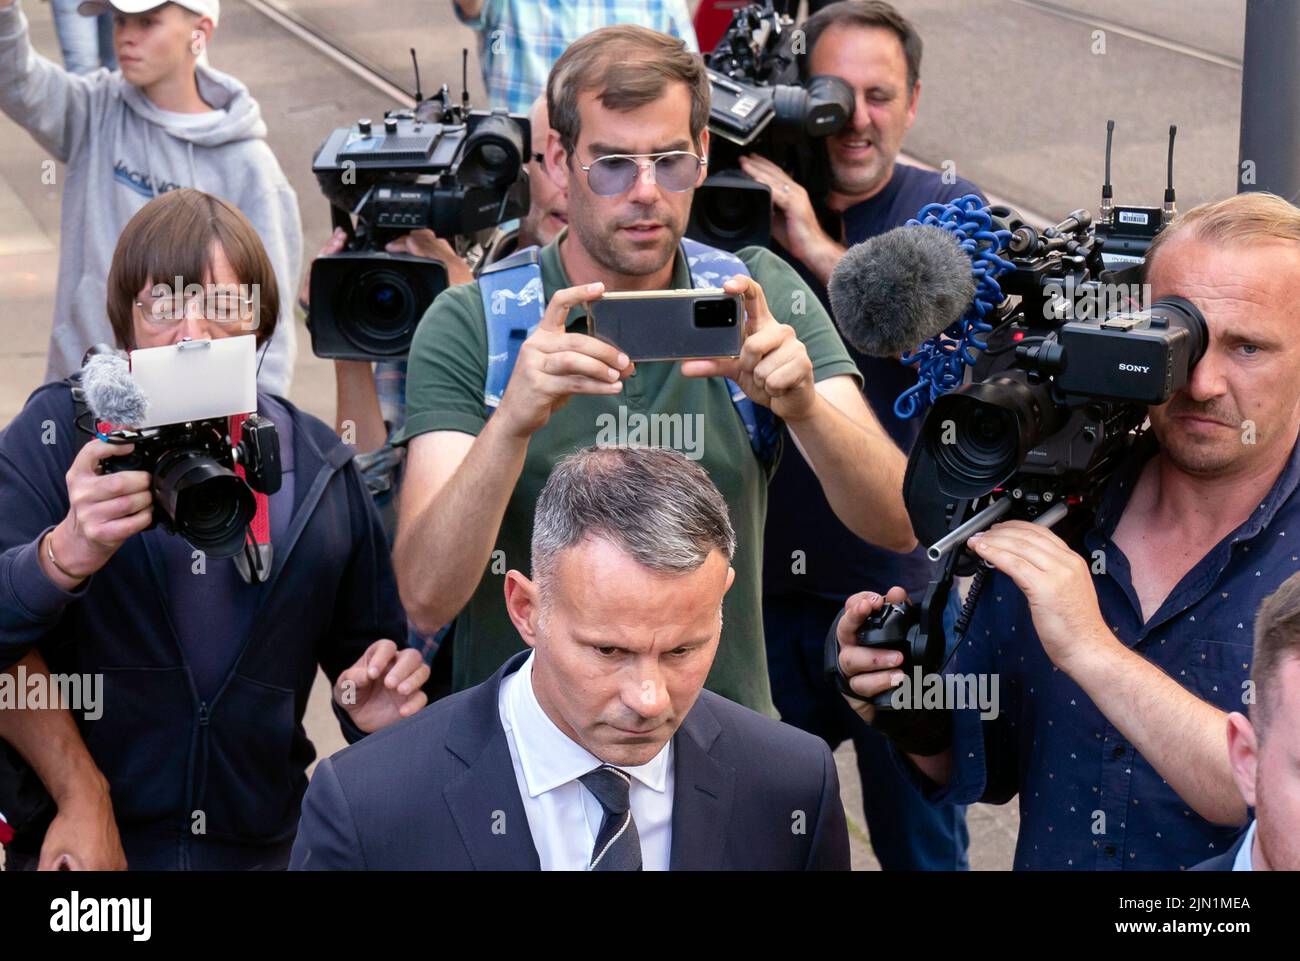 Former Manchester United footballer Ryan Giggs leaves Manchester Minshull Street Crown Court where he is accused of controlling and coercive behaviour against ex-girlfriend Kate Greville between August 2017 and November 2020. Picture date: Monday August 8, 2022. Stock Photo